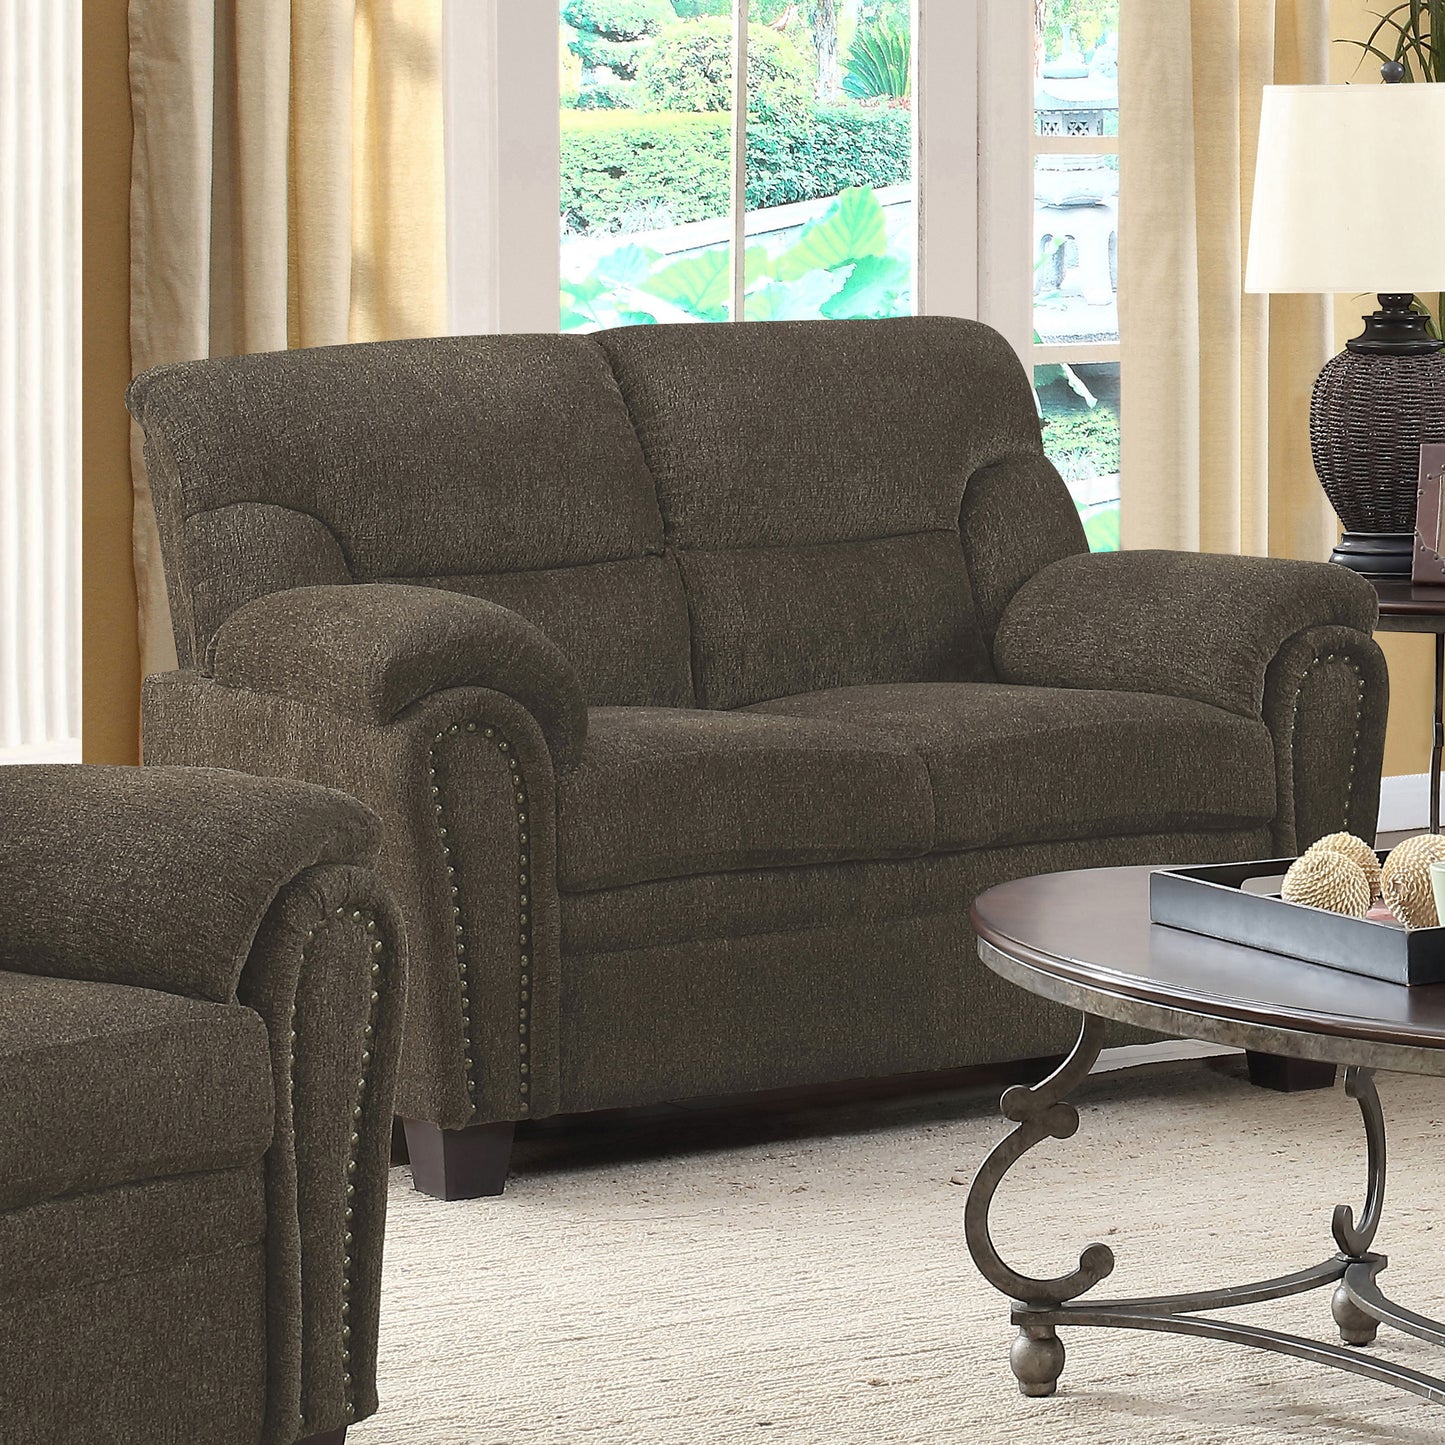 Clementine Upholstered Loveseat with Nailhead Trim Brown